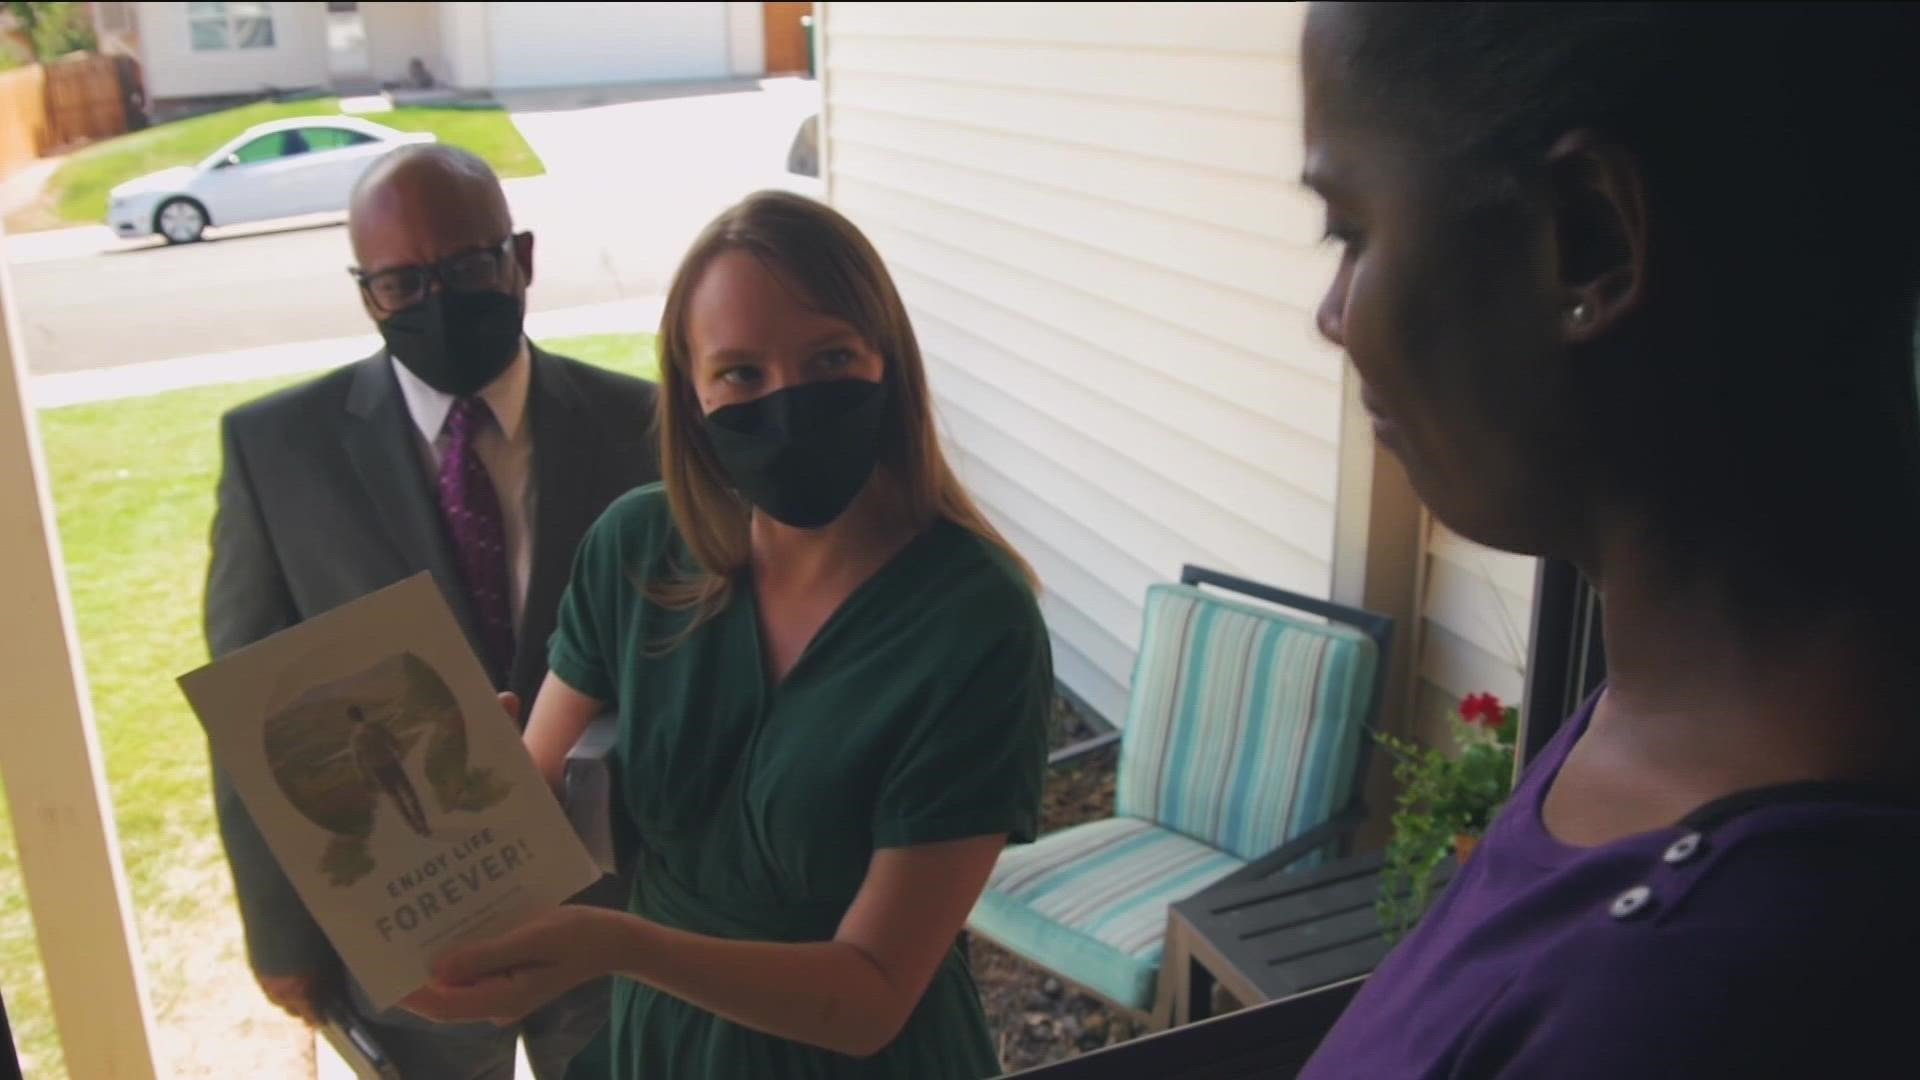 The COVID-19 pandemic halted Jehovah's Witnesses trademark door-to-door knocking for 30 months. During the break, local families wrote letters and made phone calls.